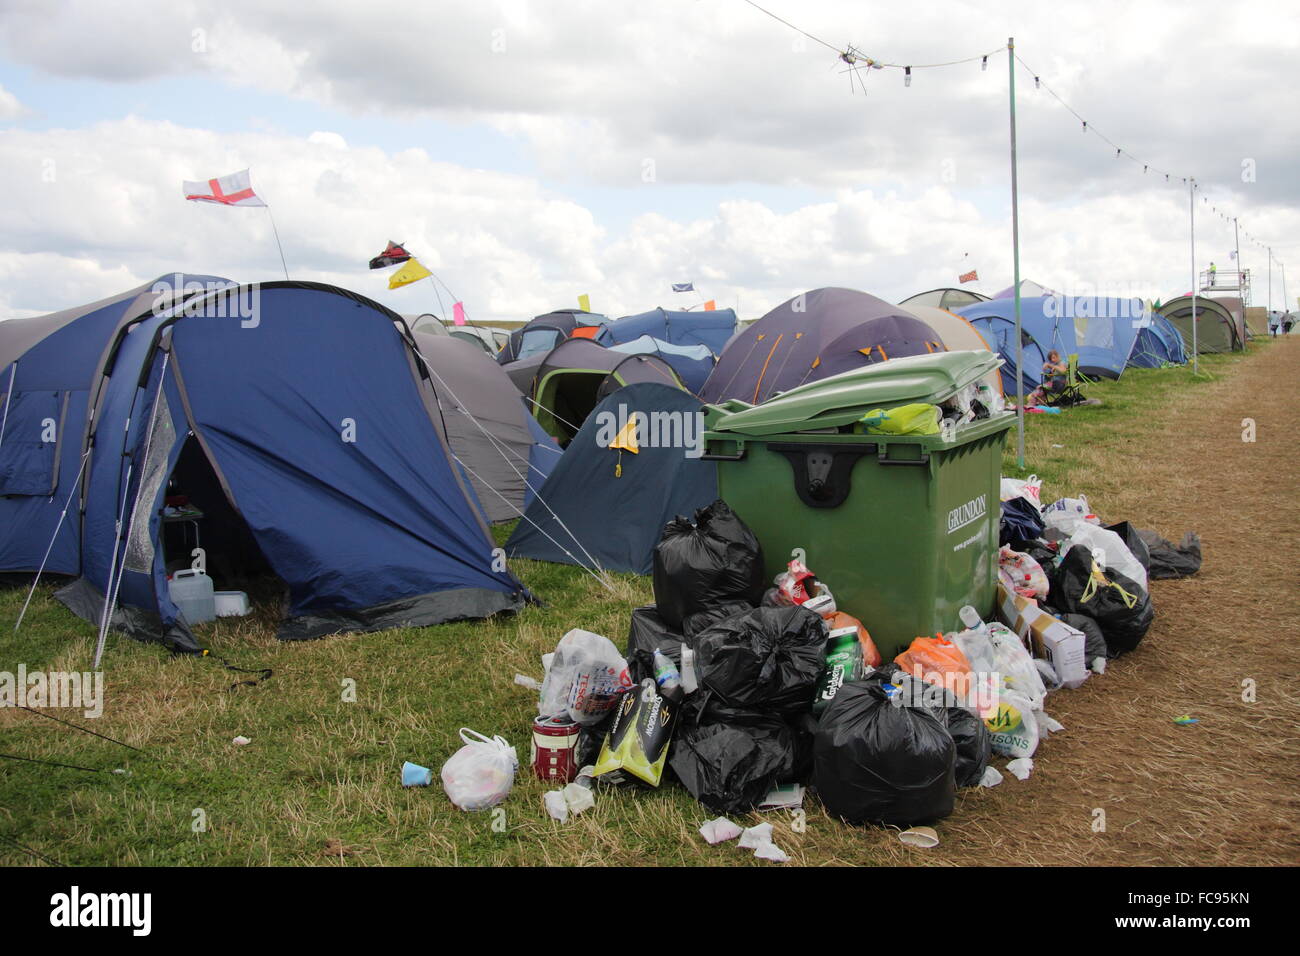 Rubbish surrounds a bin by festival goers' tents in a camping field at the Y Not music festival in the Peak District, UK Stock Photo